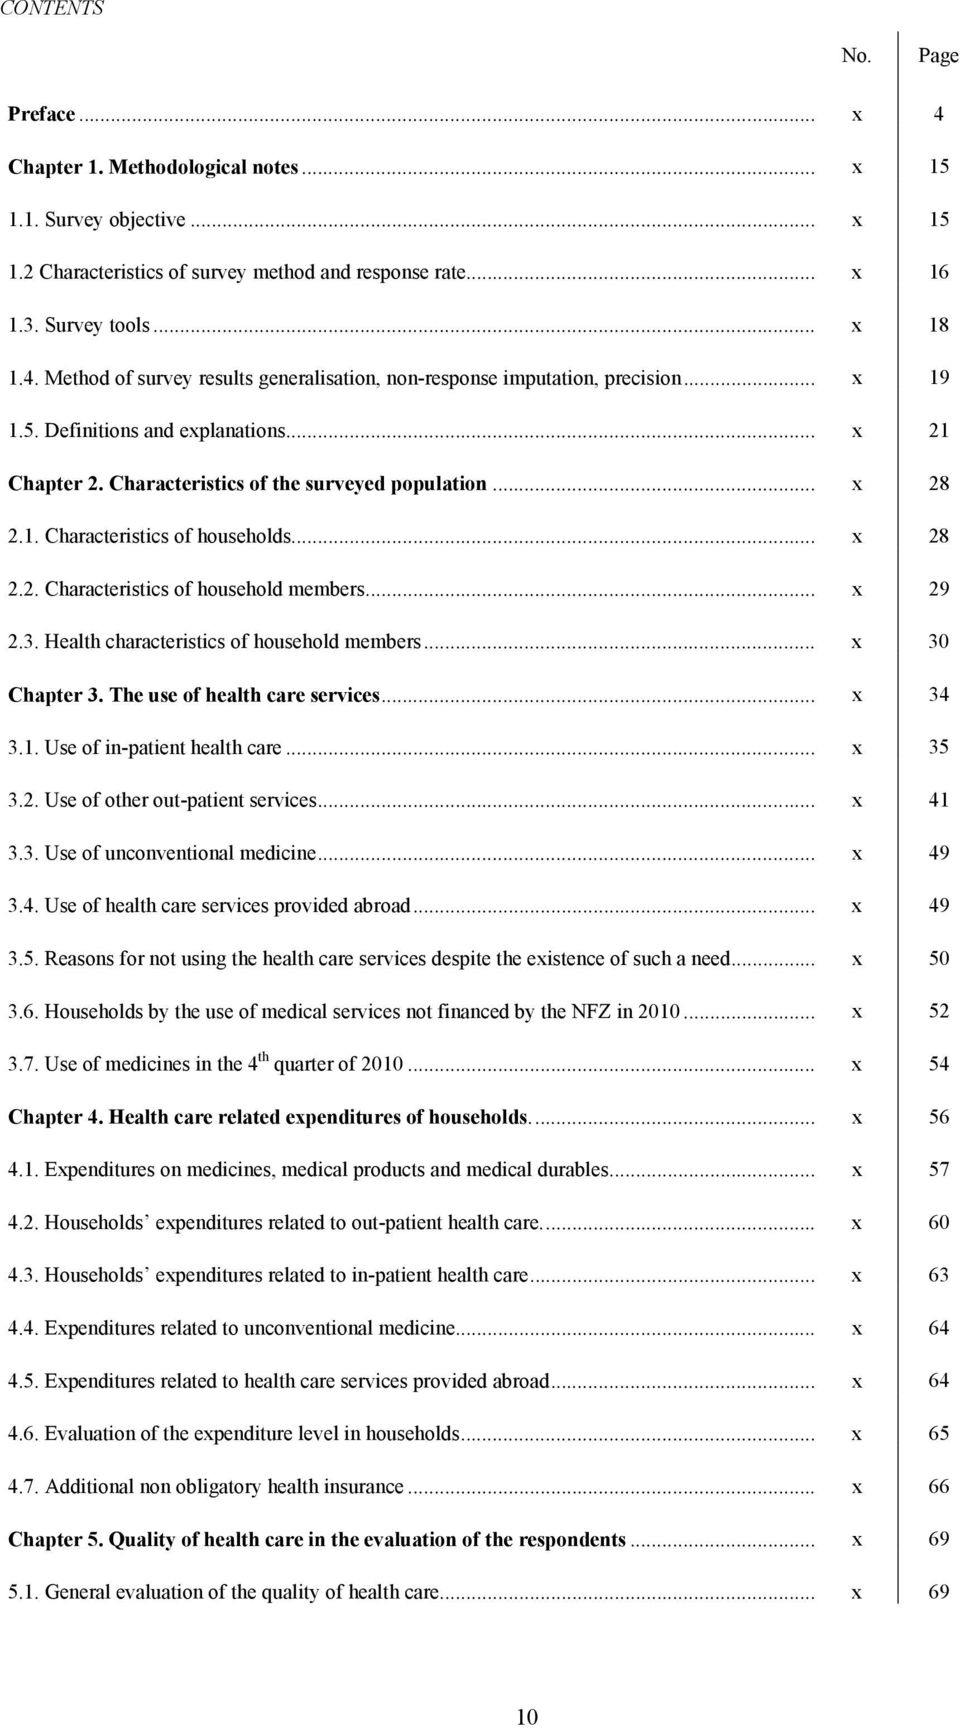 .. x 29 2.3. Health characteristics of household members... x 30 Chapter 3. The use of health care services... x 34 3.1. Use of in-patient health care... x 35 3.2. Use of other out-patient services.